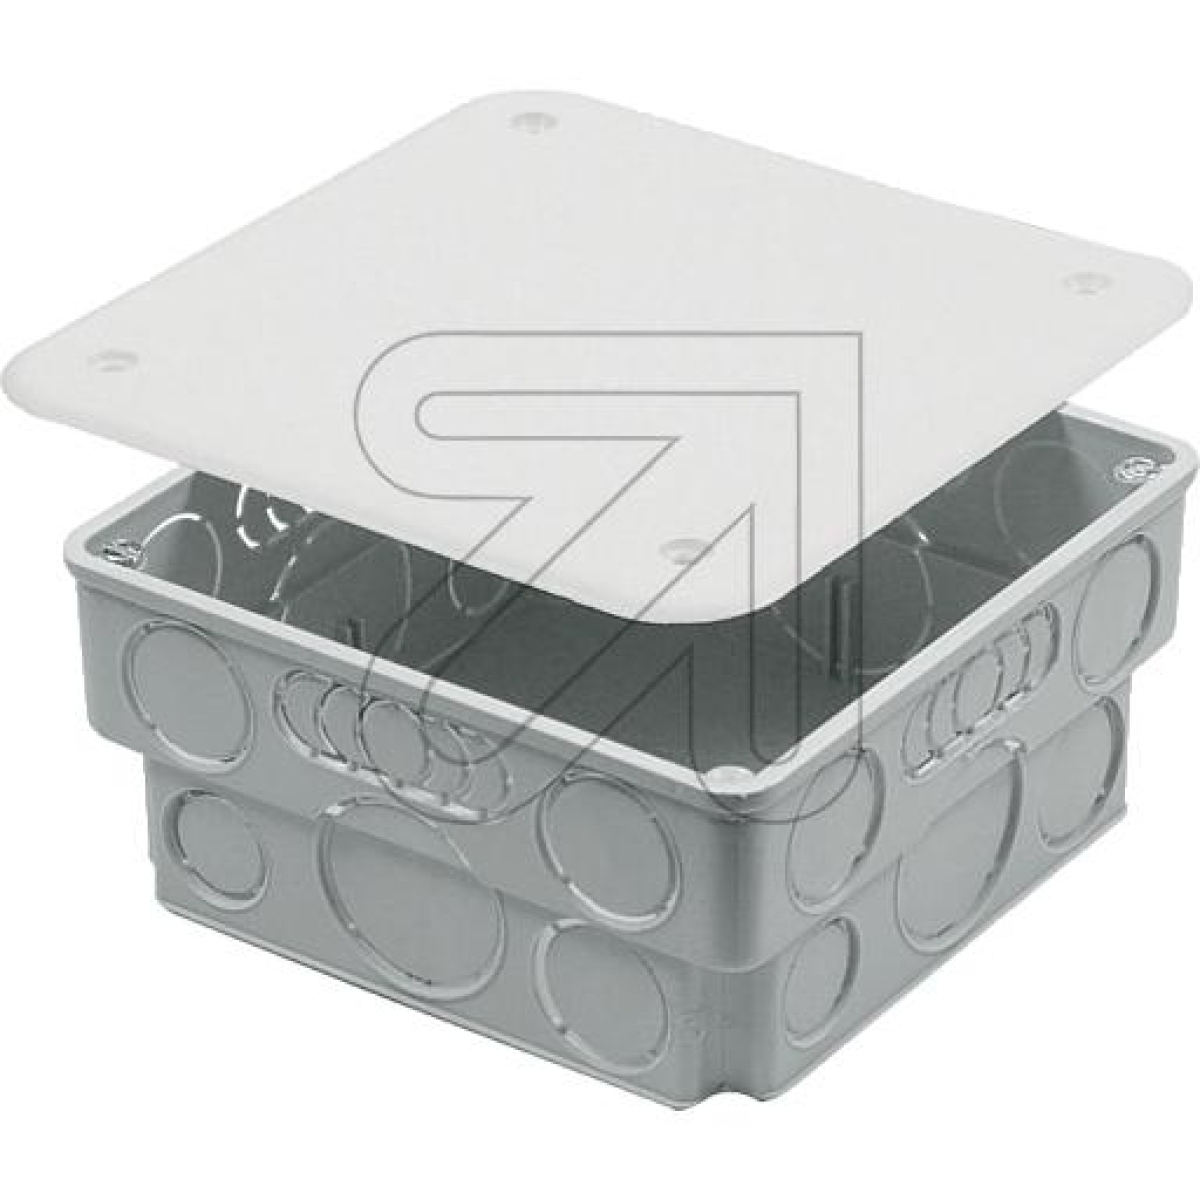 F-TronicUP junction box 100x100 with cover E141-Price for 10 pcs.Article-No: 875865